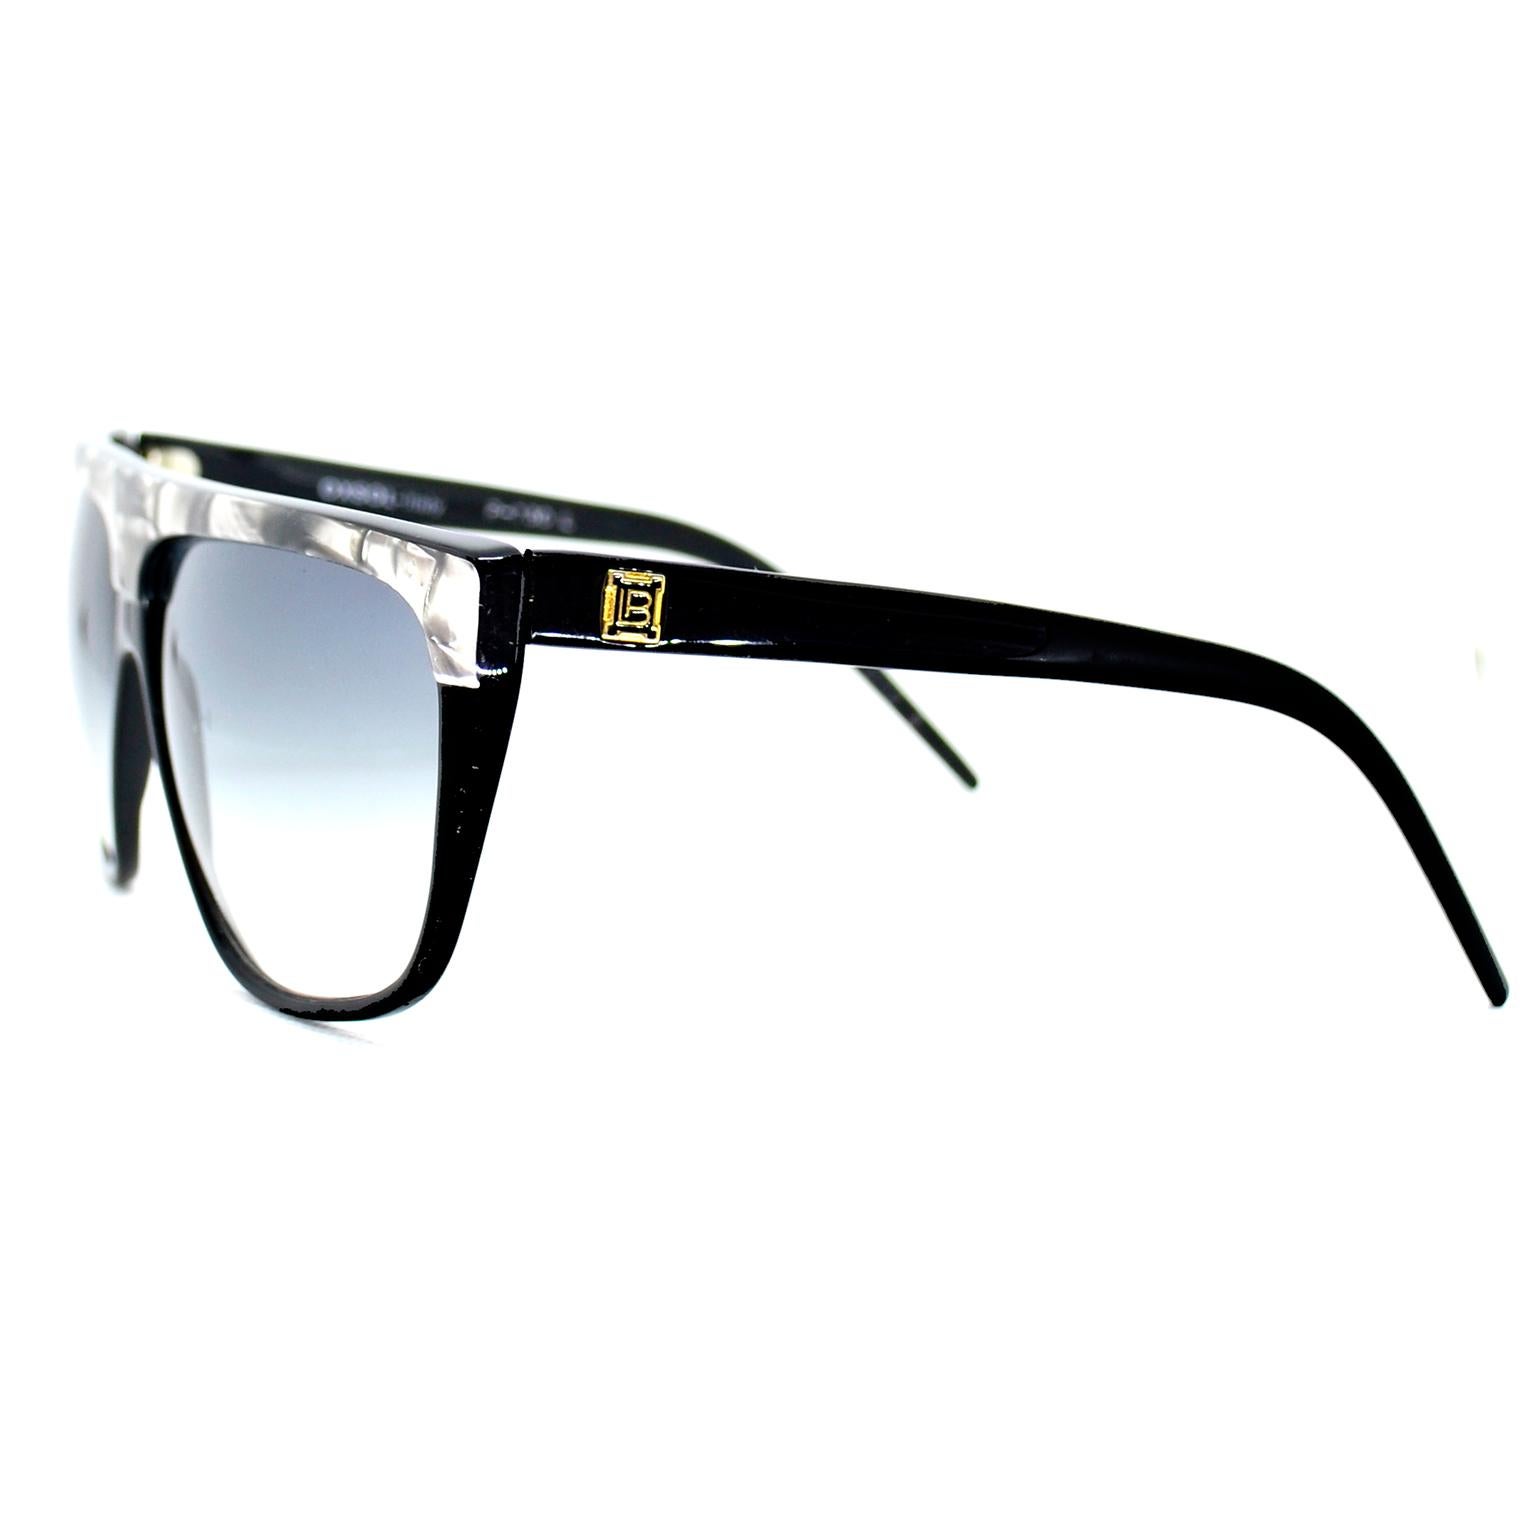 Women's Laura Biagiotti Black and Silver Marbled Vintage Sunglasses For Sale